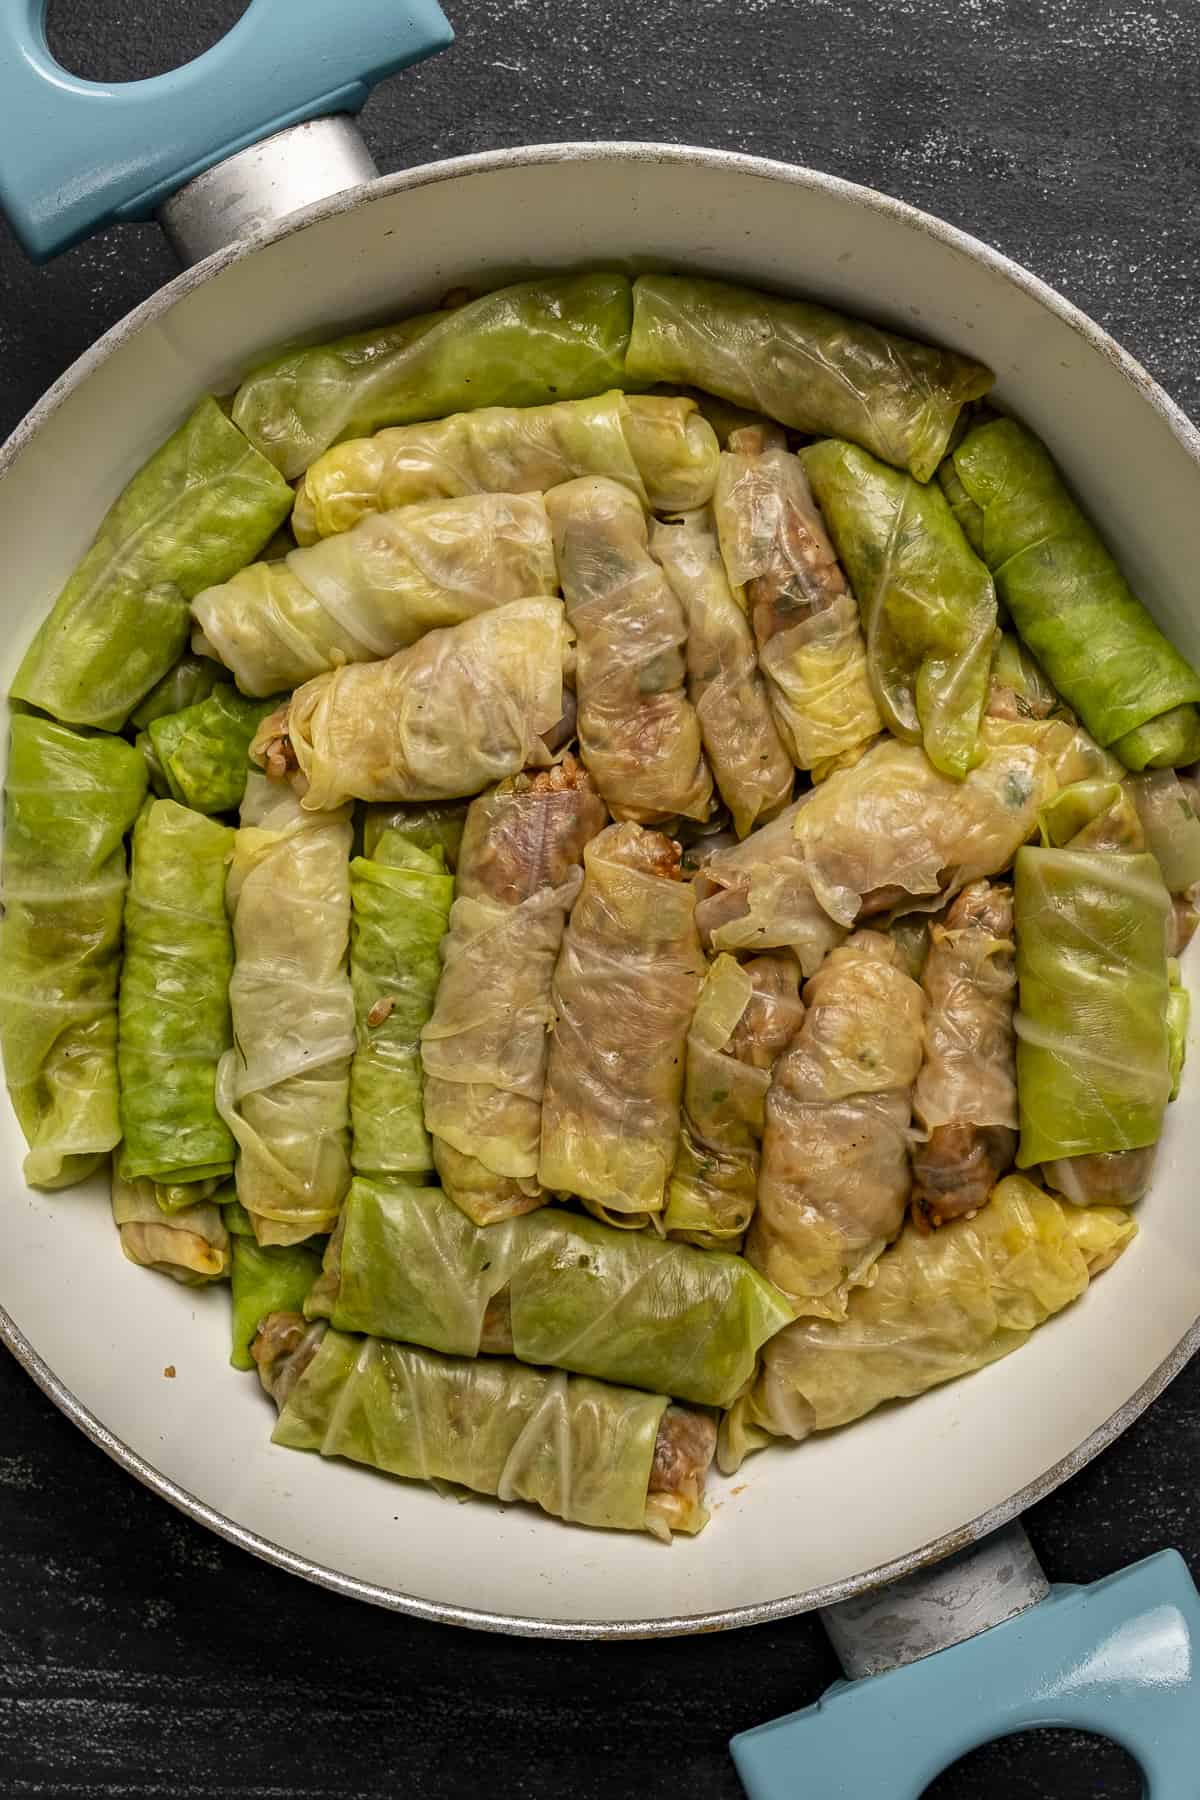 Uncooked cabbage rolls in a white pan.